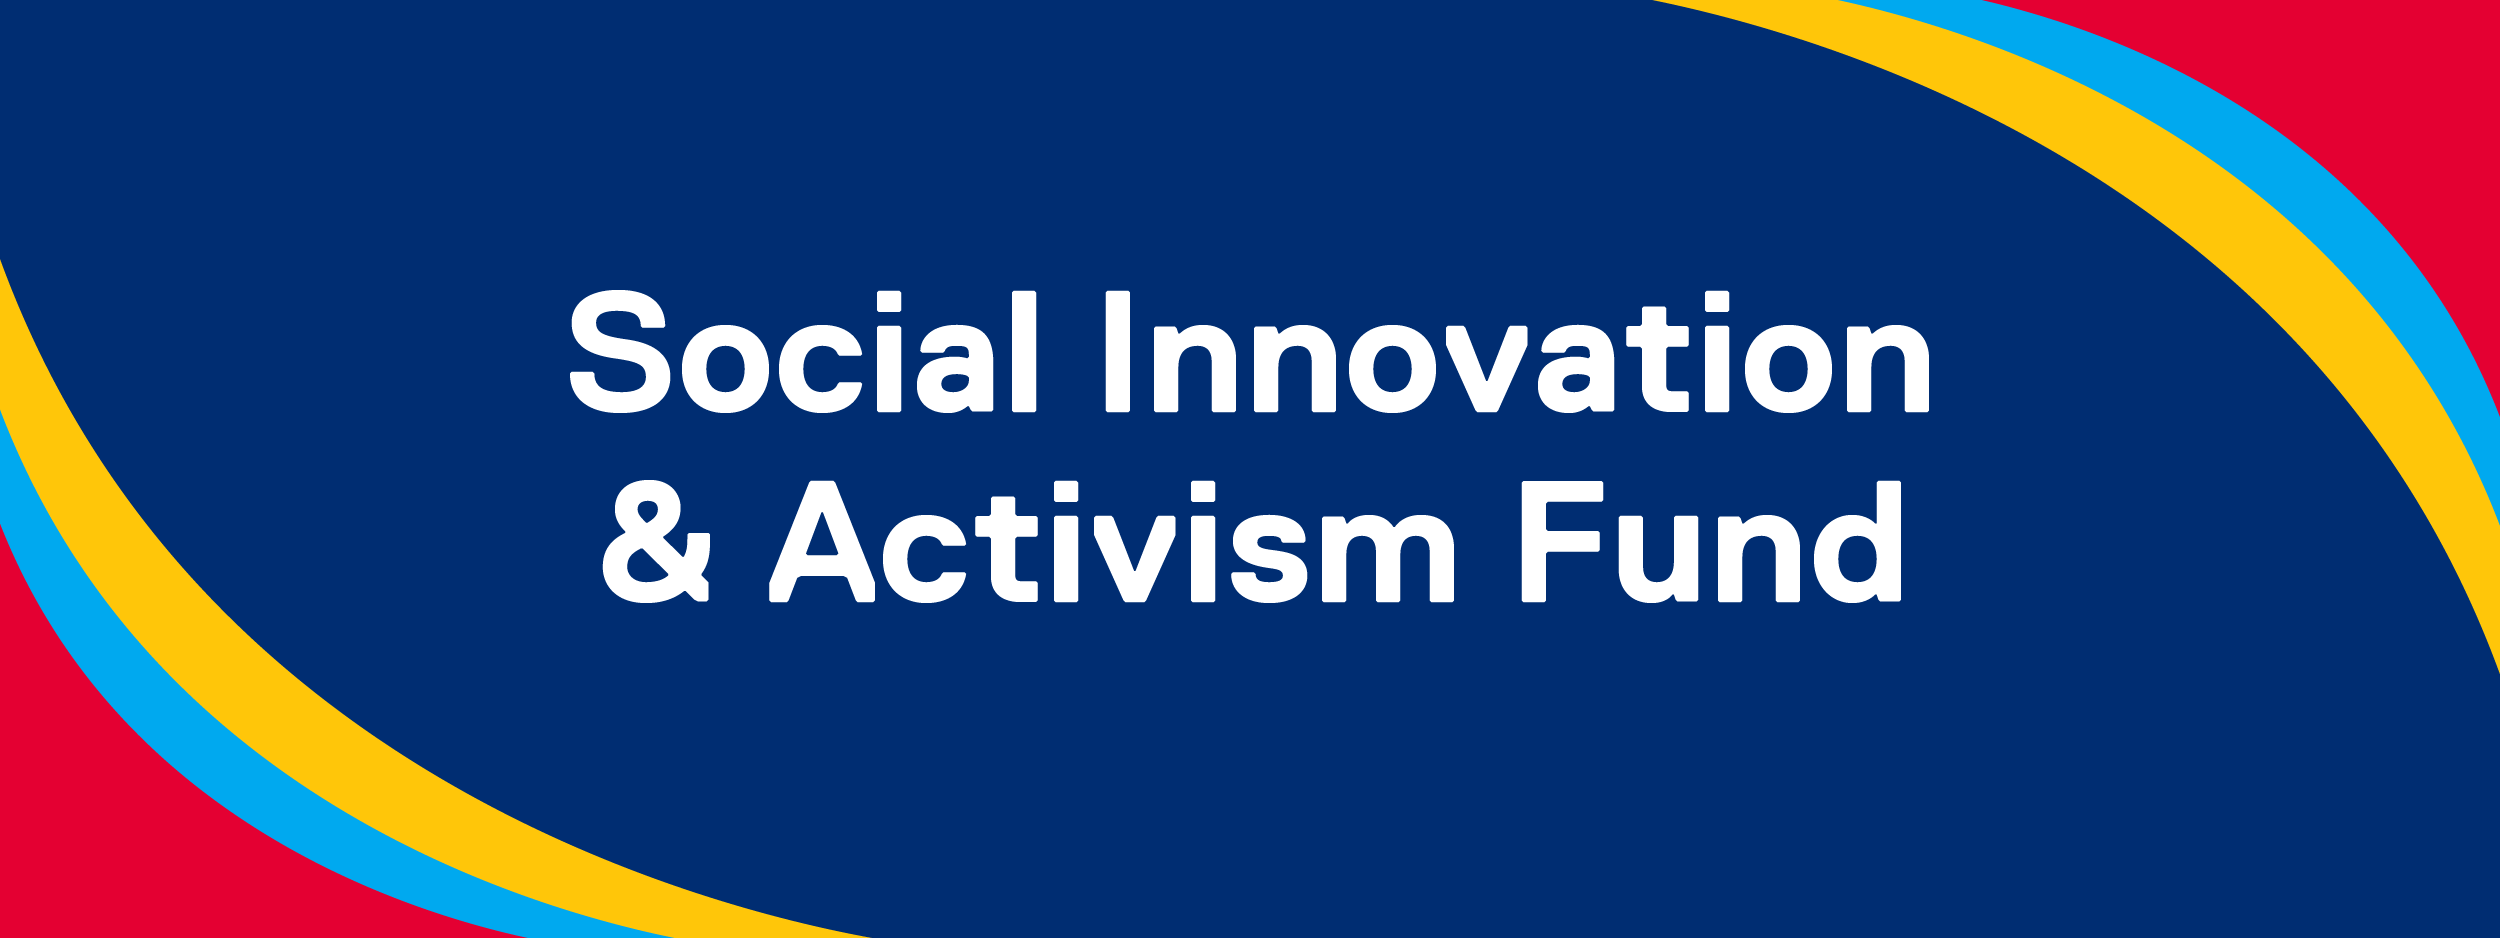 Navy blue background with red, blue and yellow border. White font reads "Social Innovation & Activism Fund"